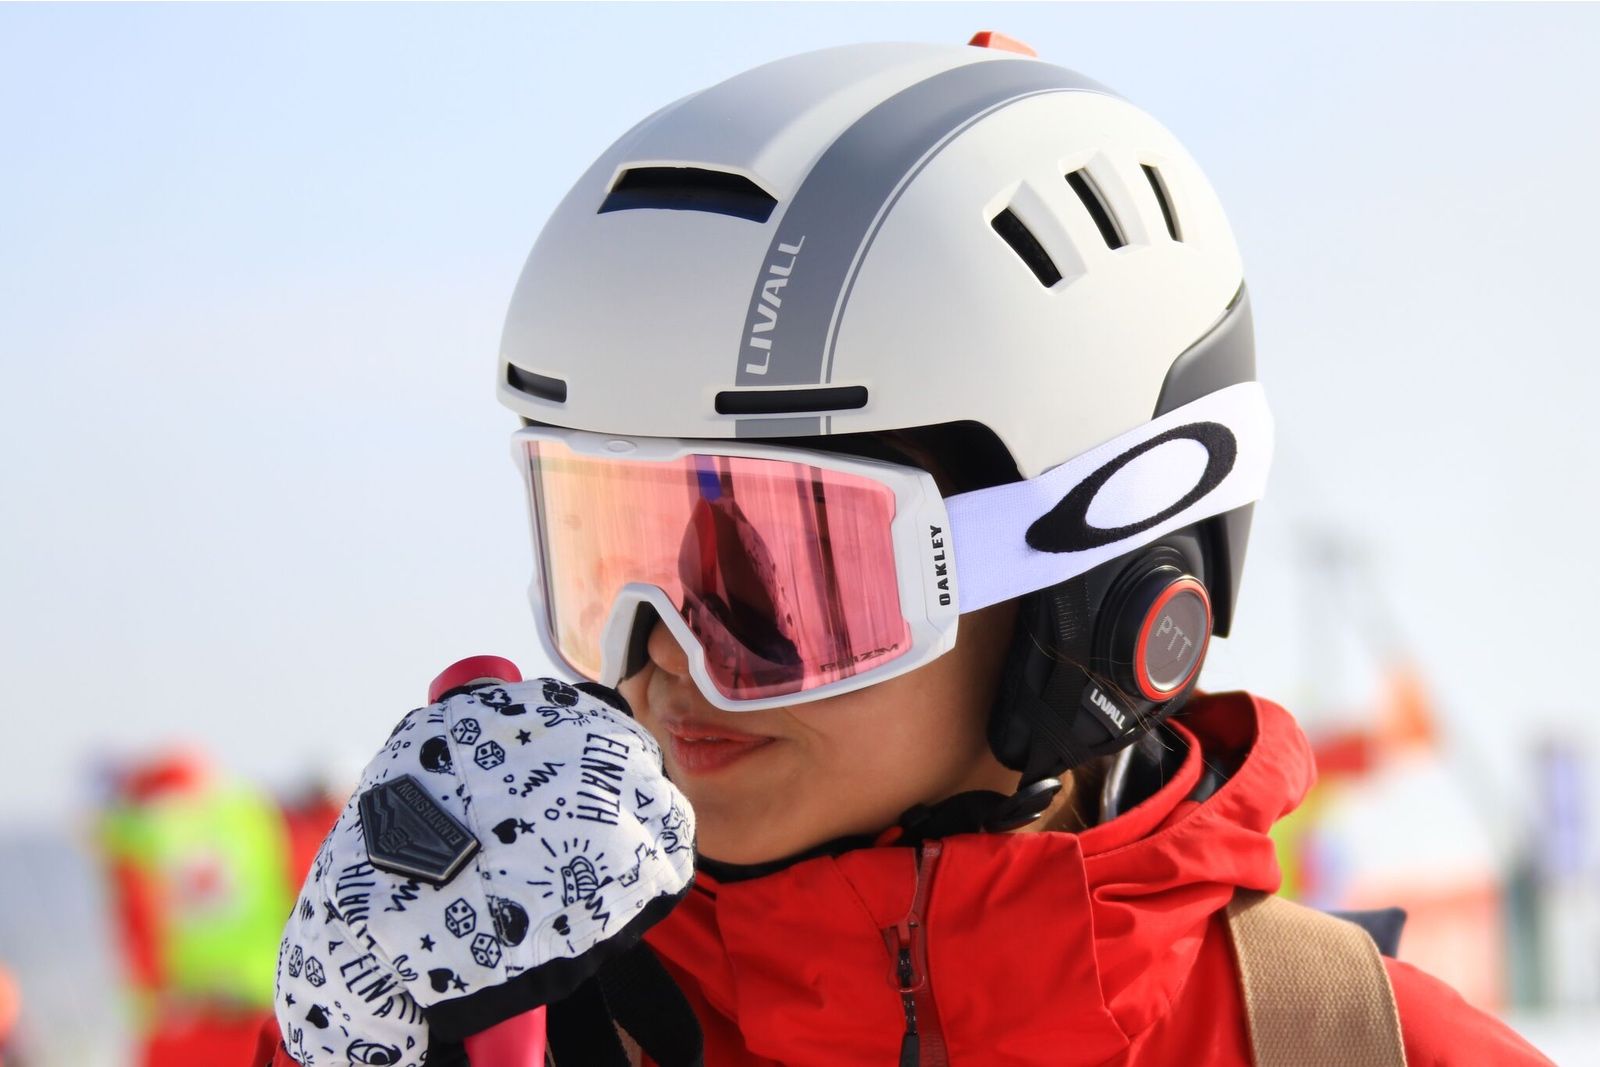 Best ski tech for 2020 Hit the slopes with smart gadgets image 1